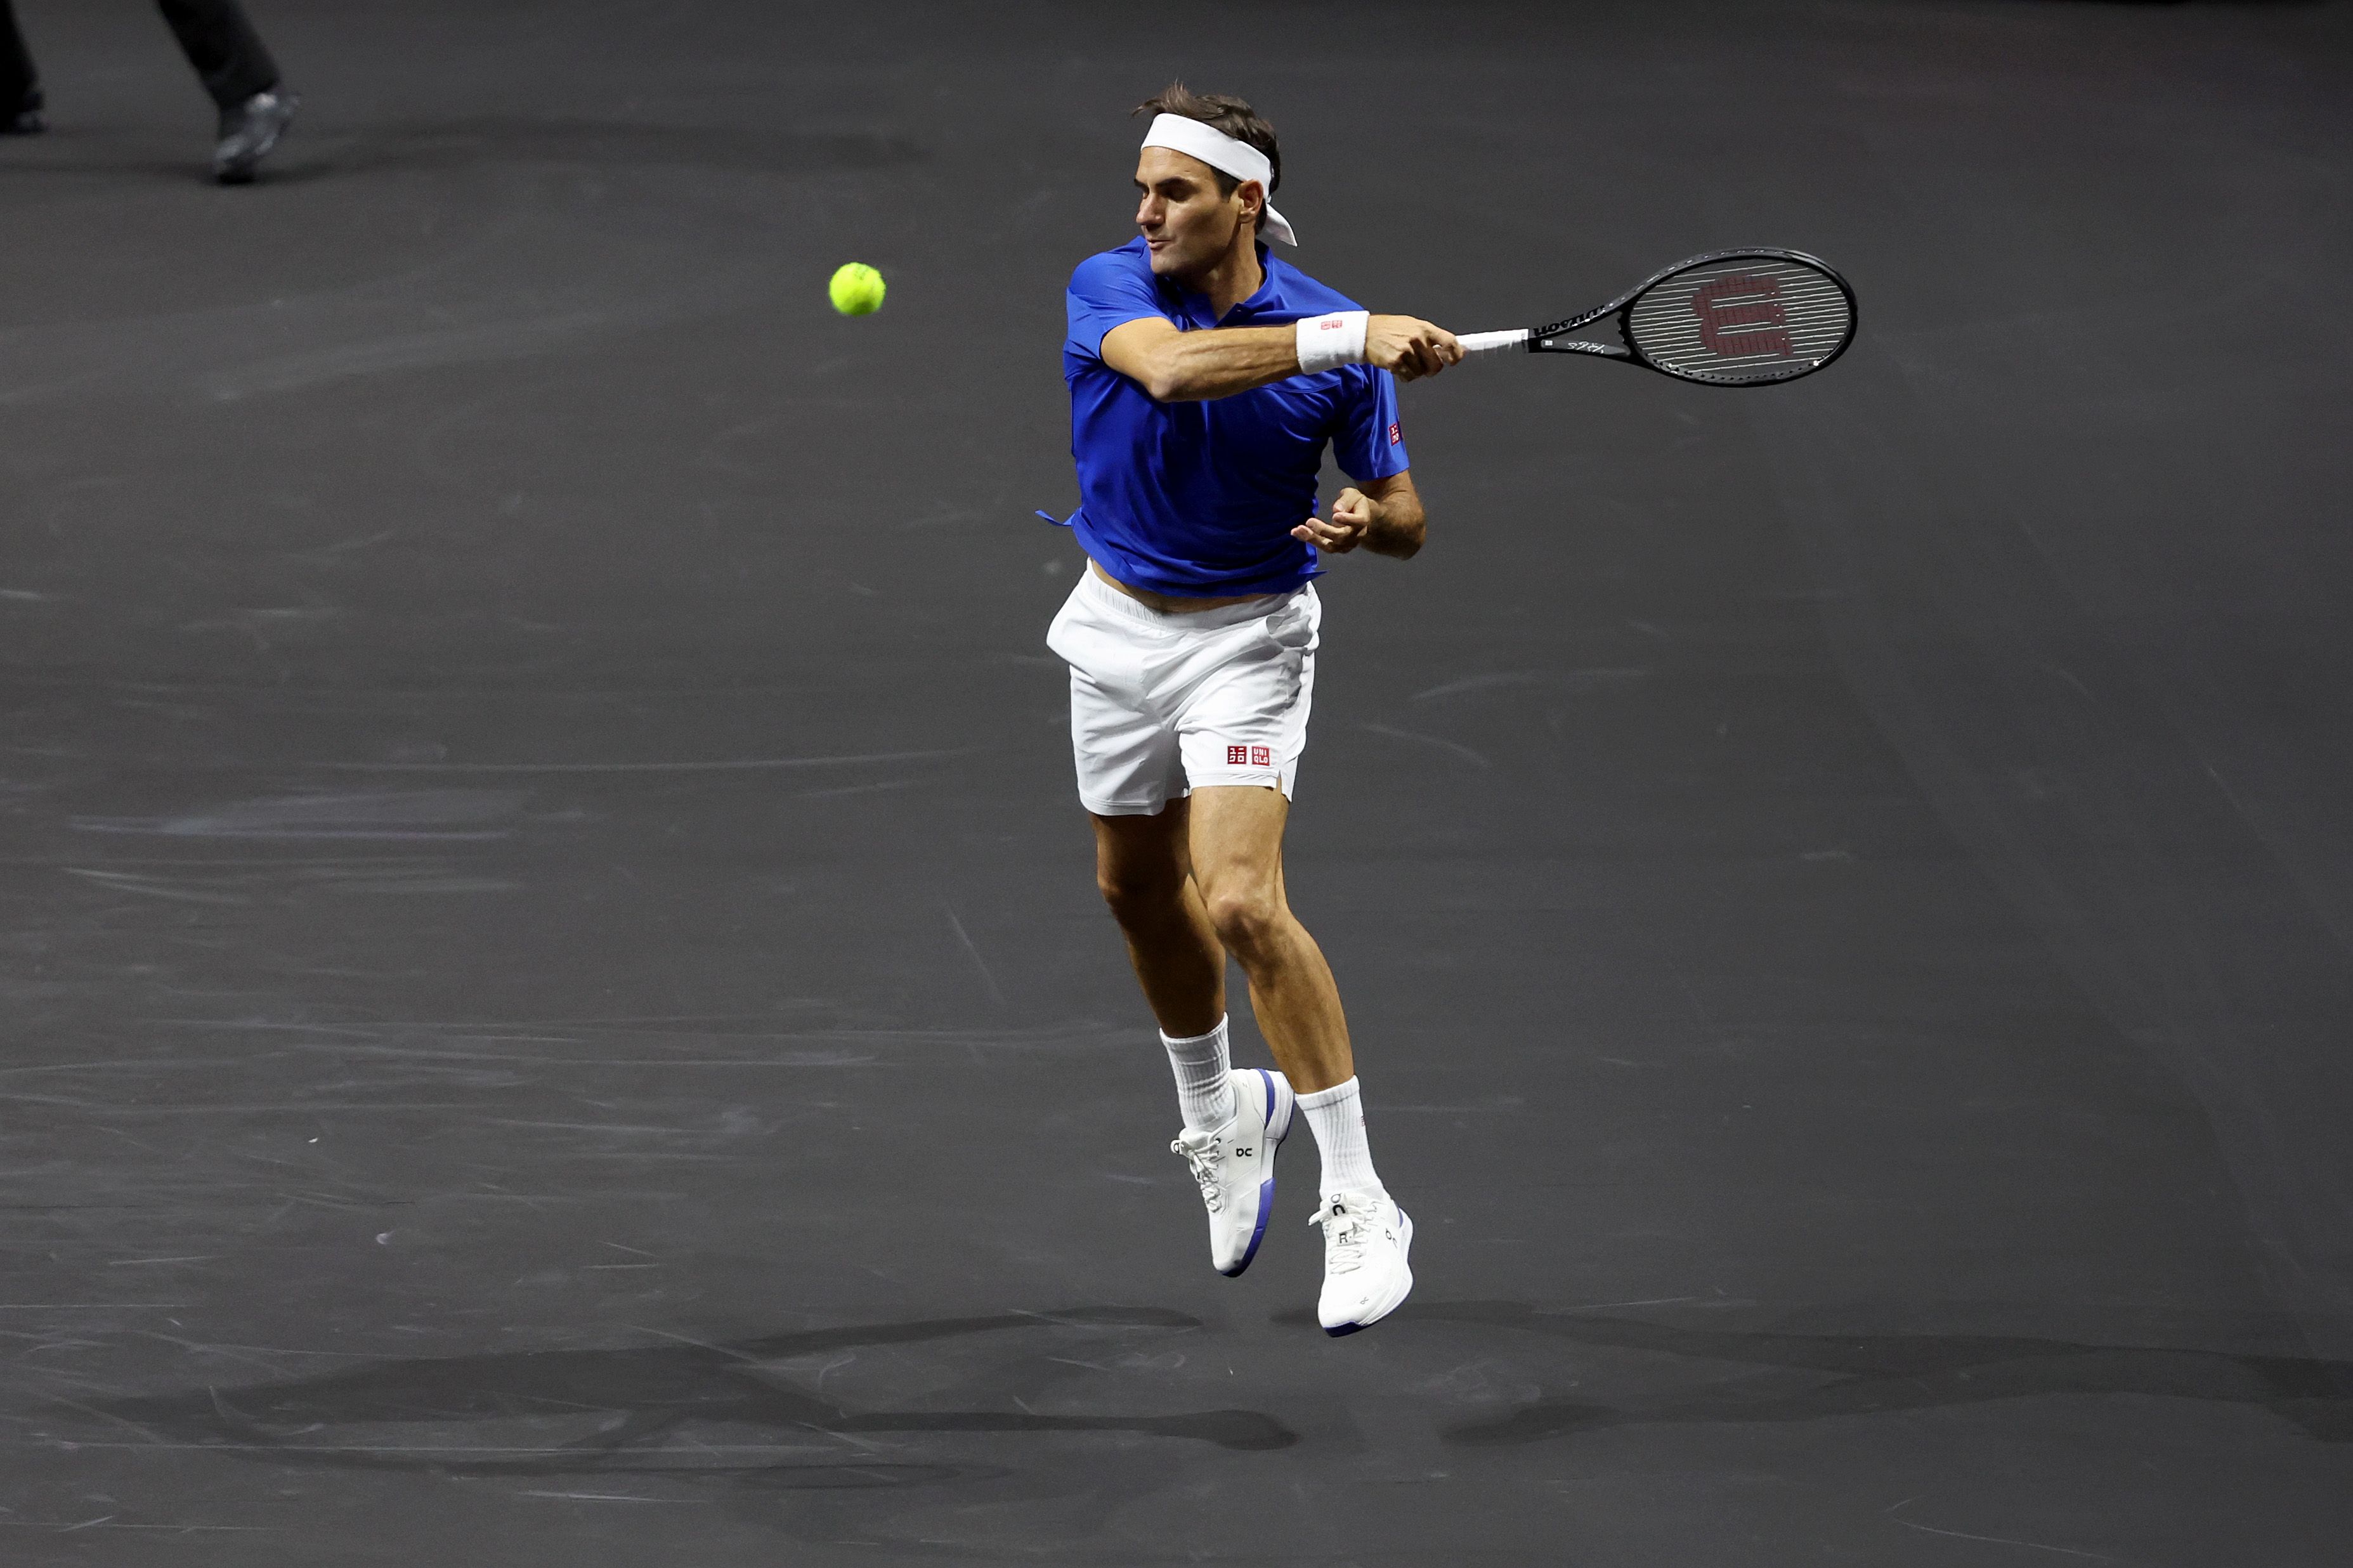 Roger Federer plays a forehand